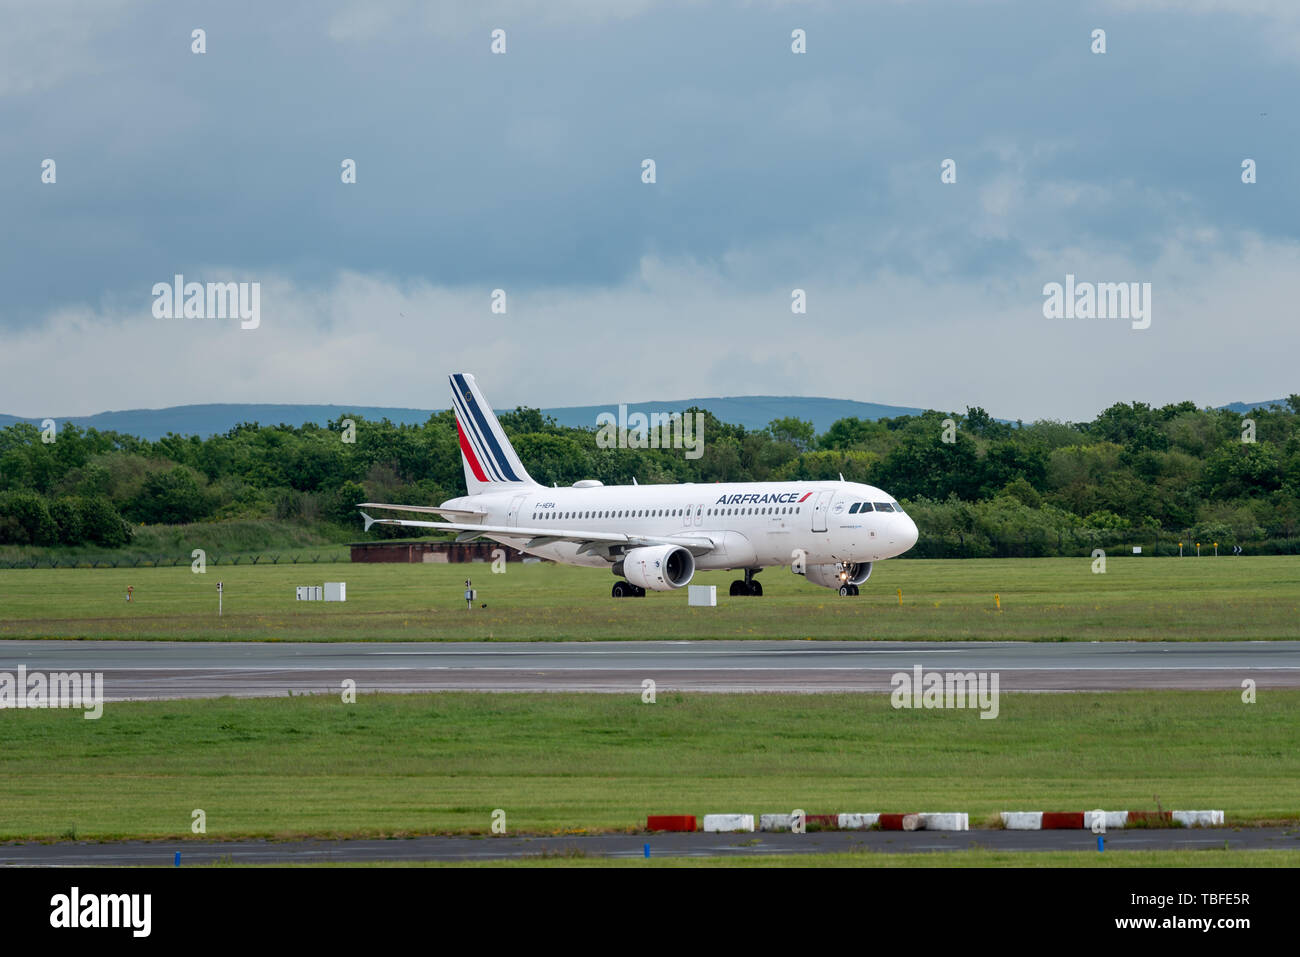 MANCHESTER UK, 30 MAY 2019: Airfrance Airbus A320 flight AF1068 from Paris lands on Runway 28R at Manchester Airport. Stock Photo